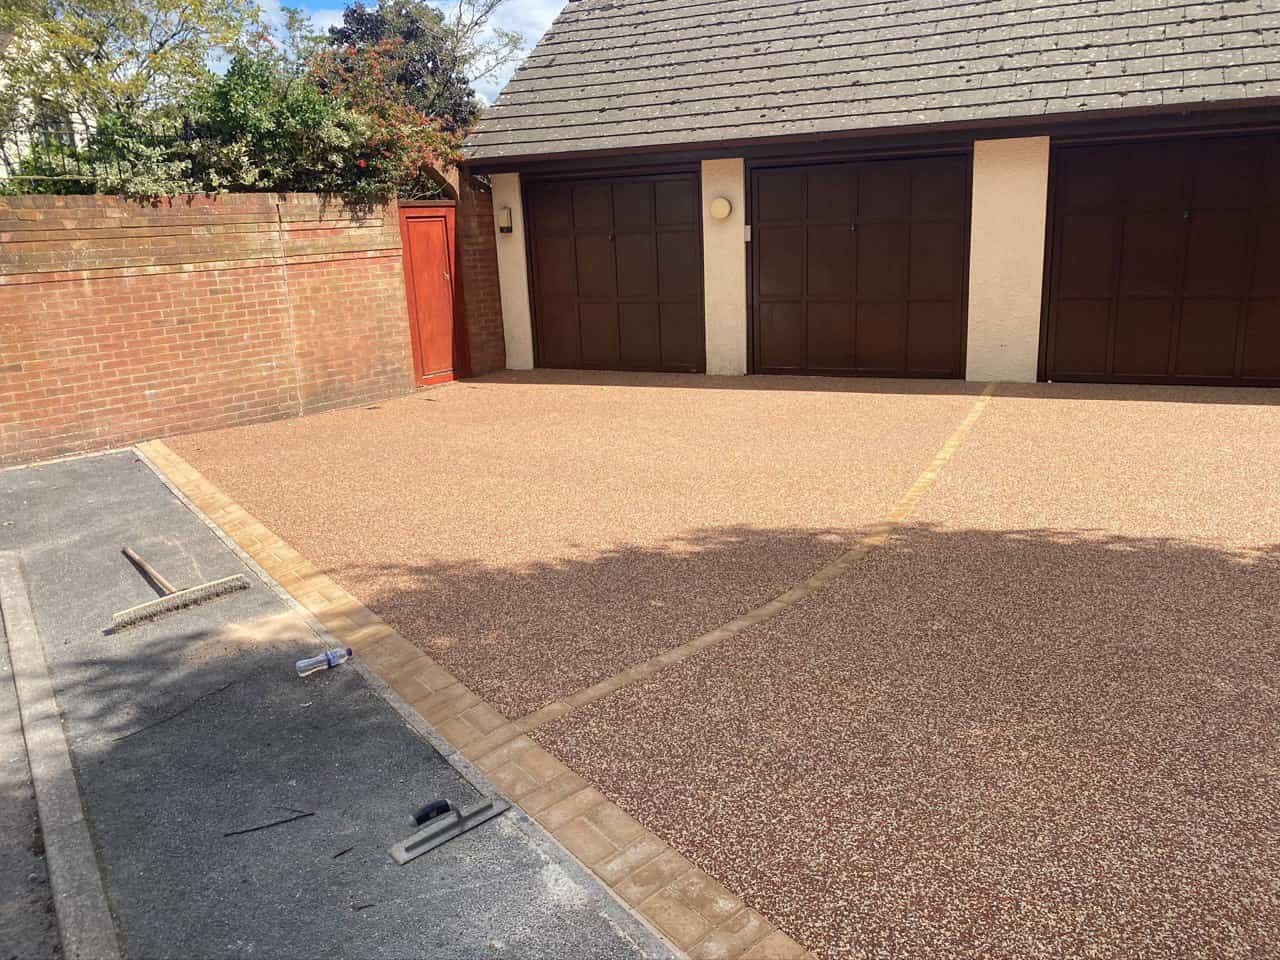 This is a photo of a resin driveway installed in Dartford, Kent by Kent Resin Drives